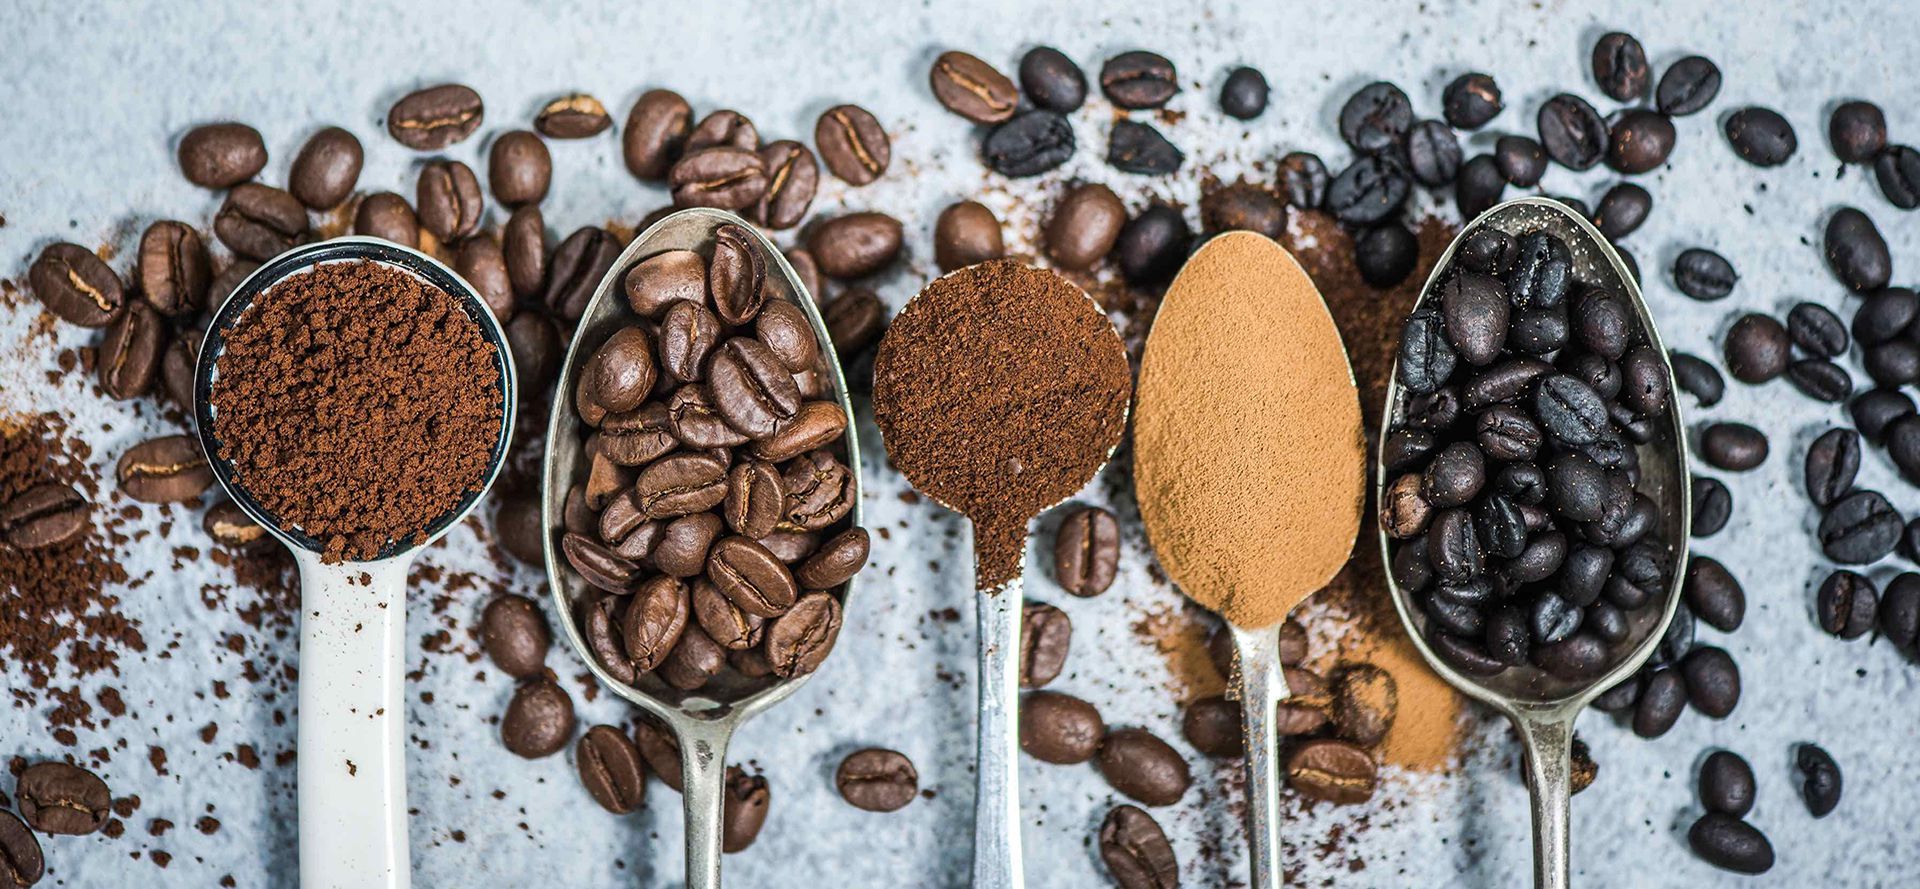 Coffee powder and coffee beans on spoons.